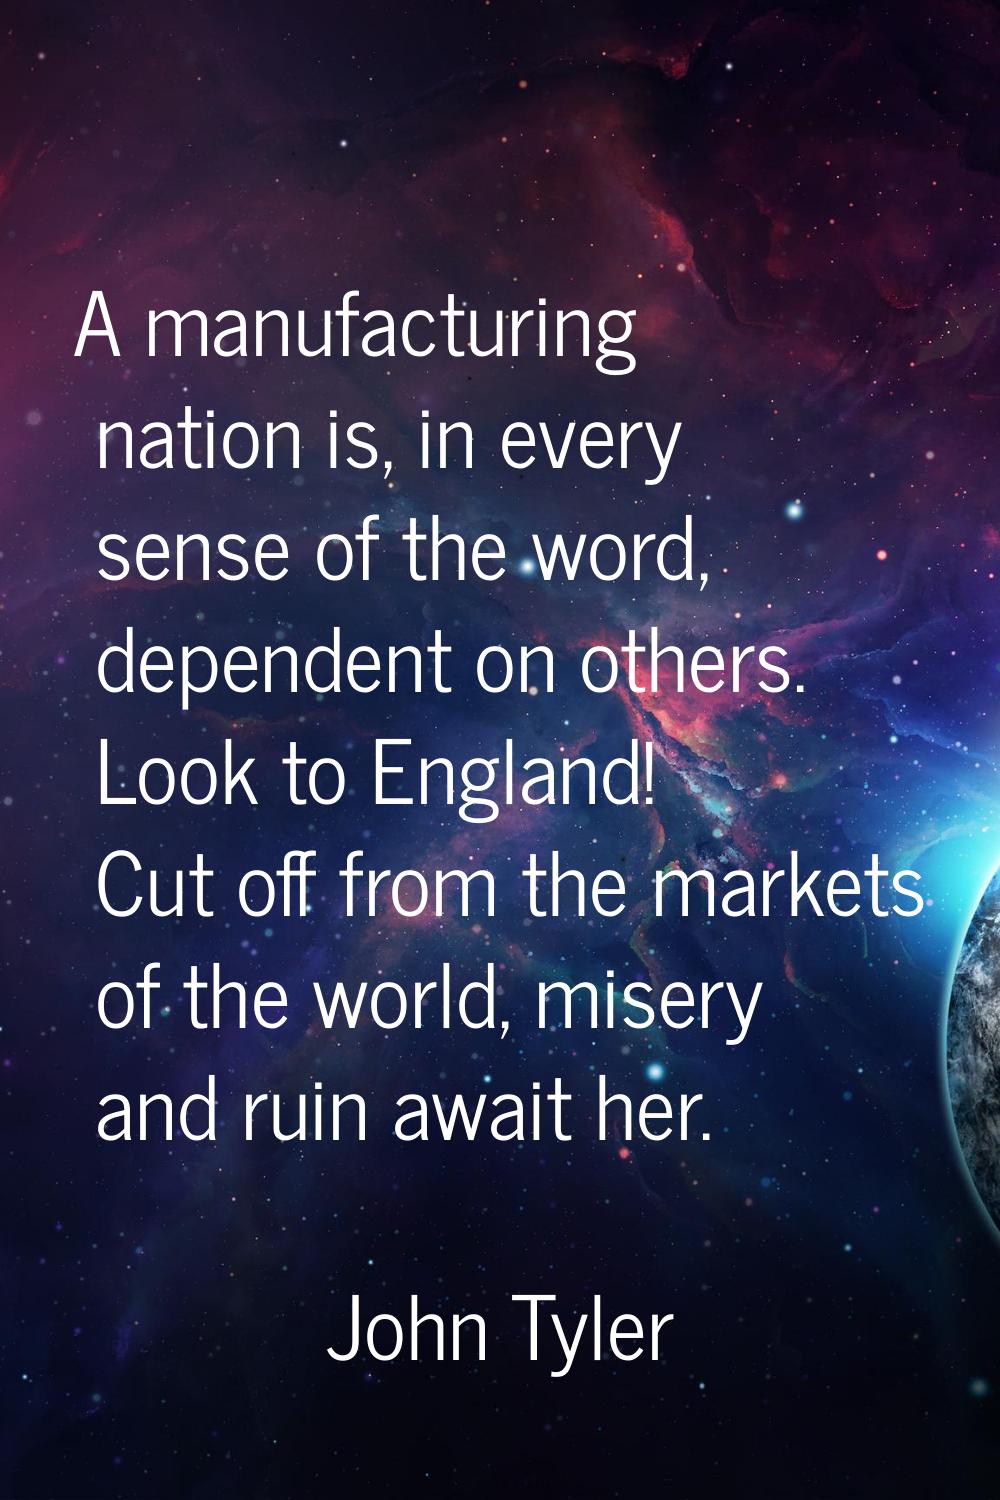 A manufacturing nation is, in every sense of the word, dependent on others. Look to England! Cut of